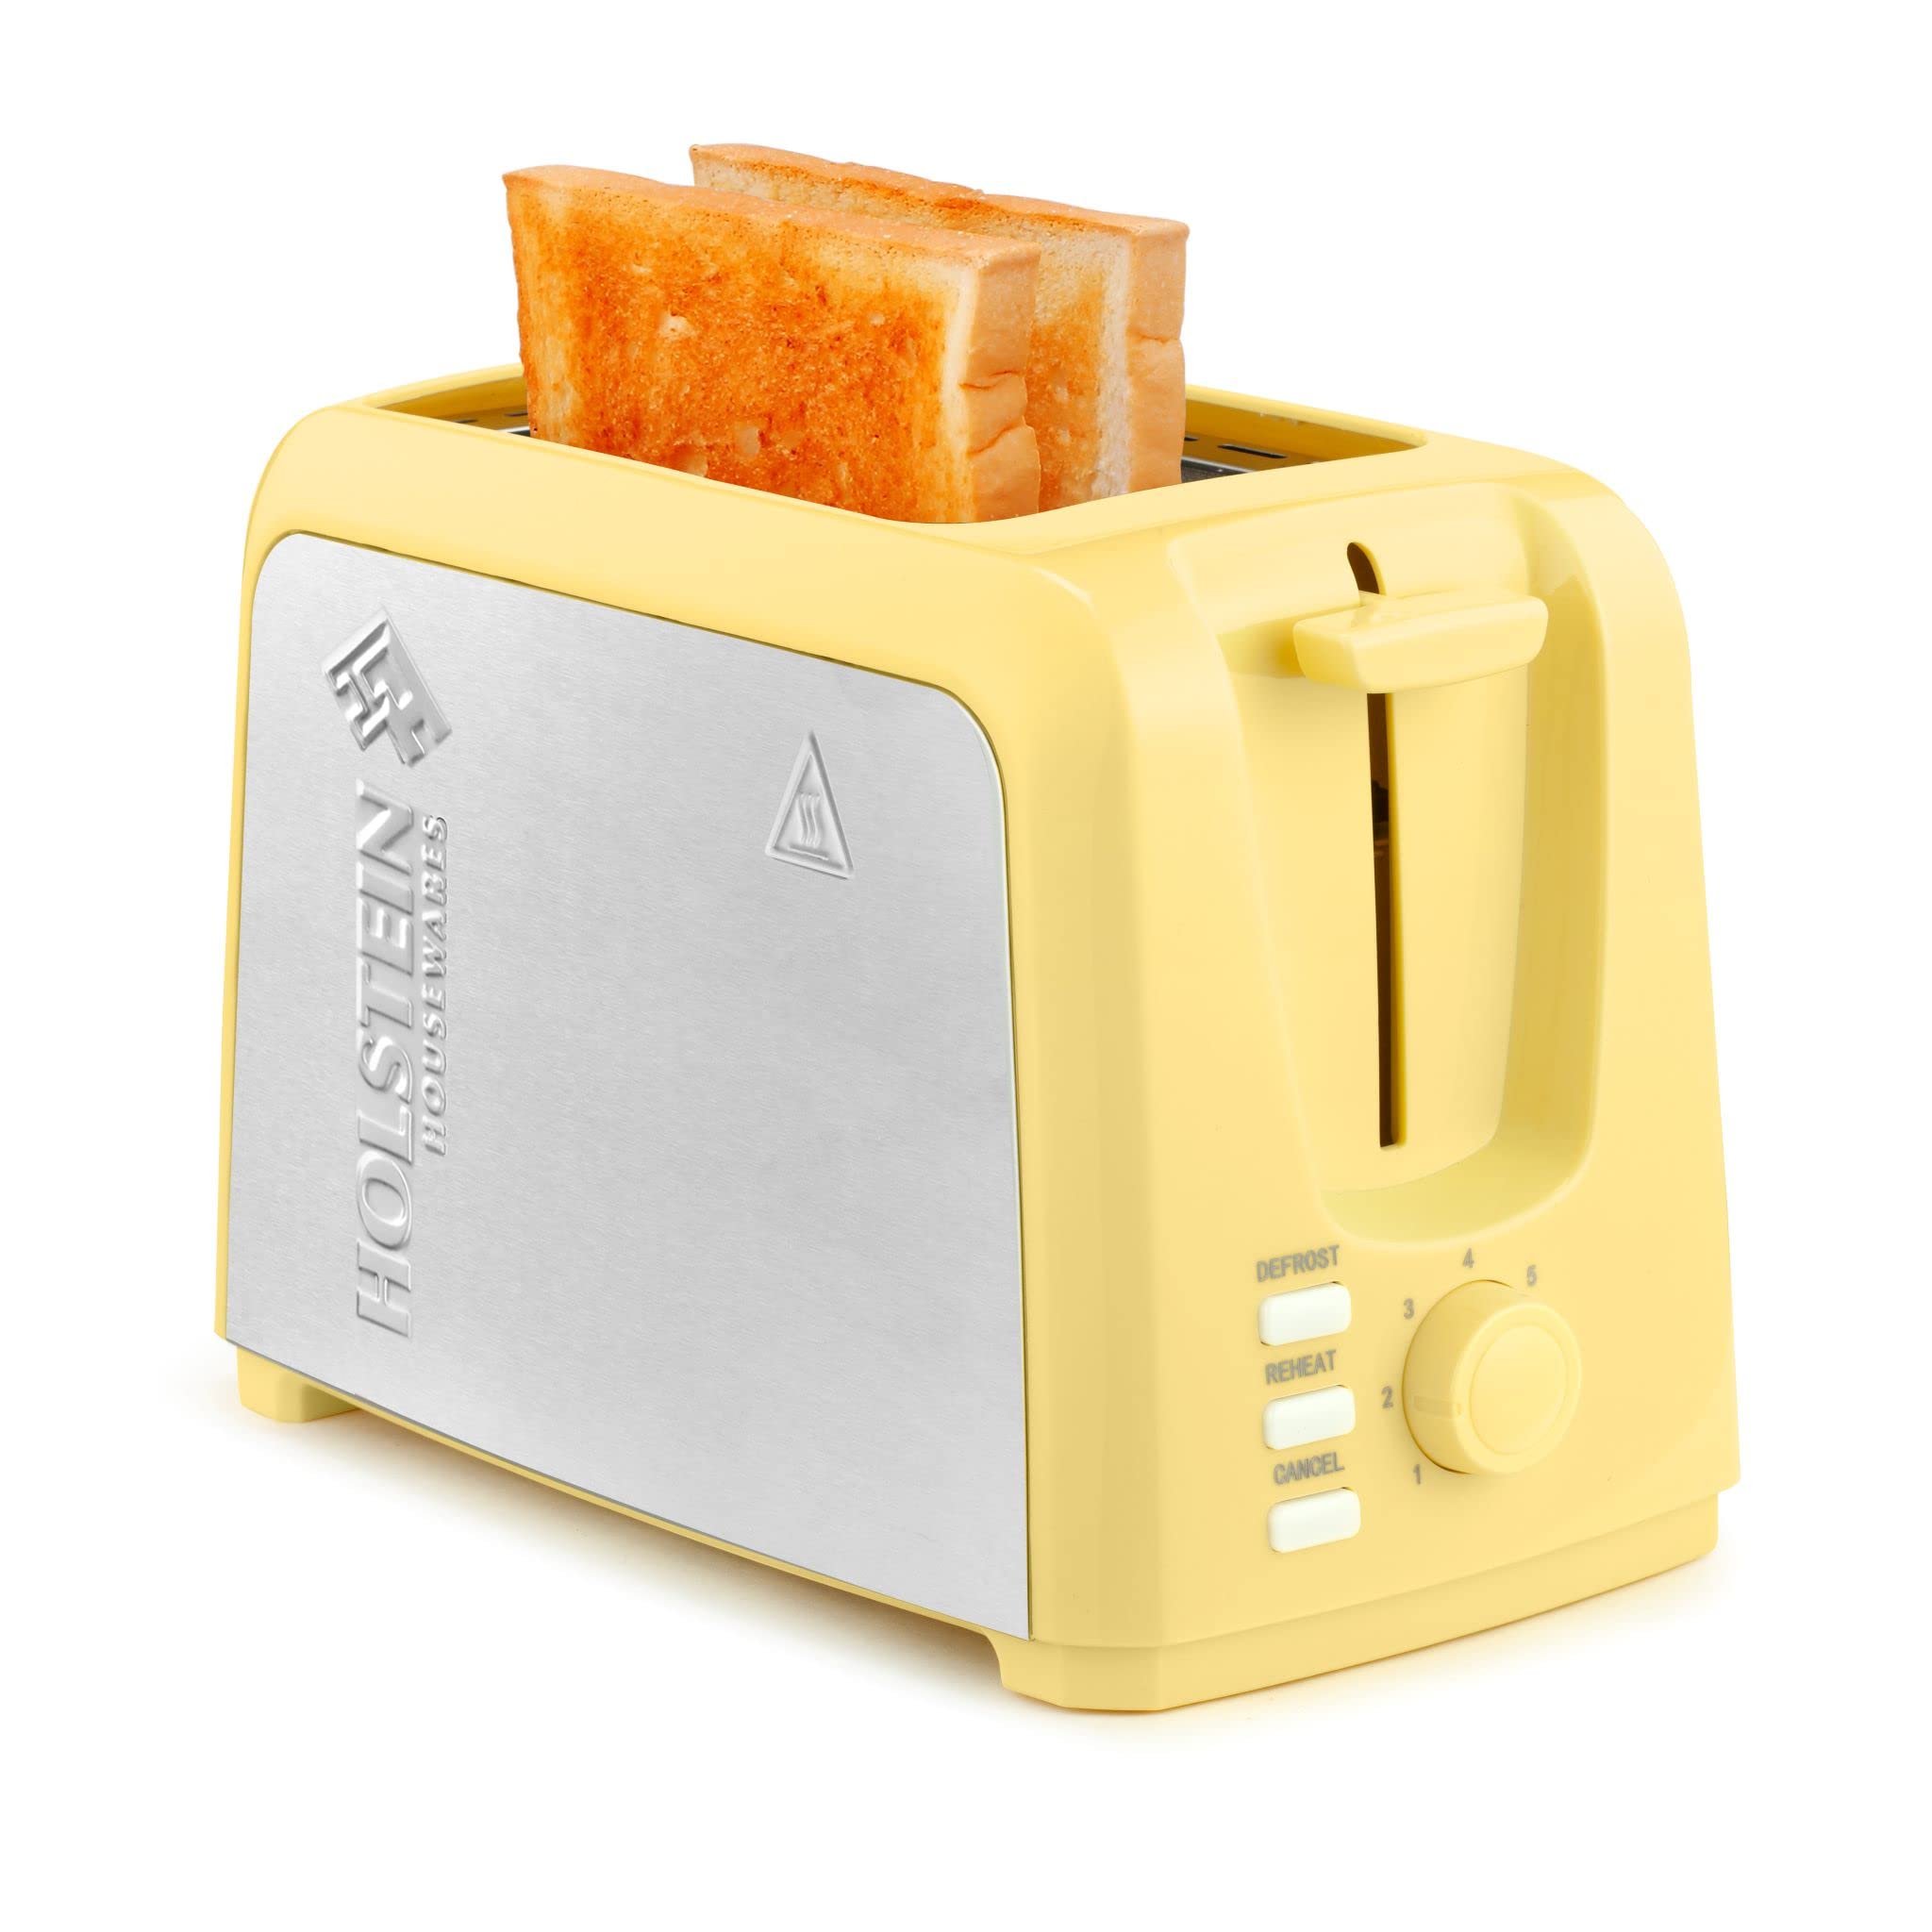 Holstein Housewares - 2-Slice Toaster with 7 Browning Control Settings, Yellow/Stainless Steel - Great to Toast Bread, Bagels and Waffles